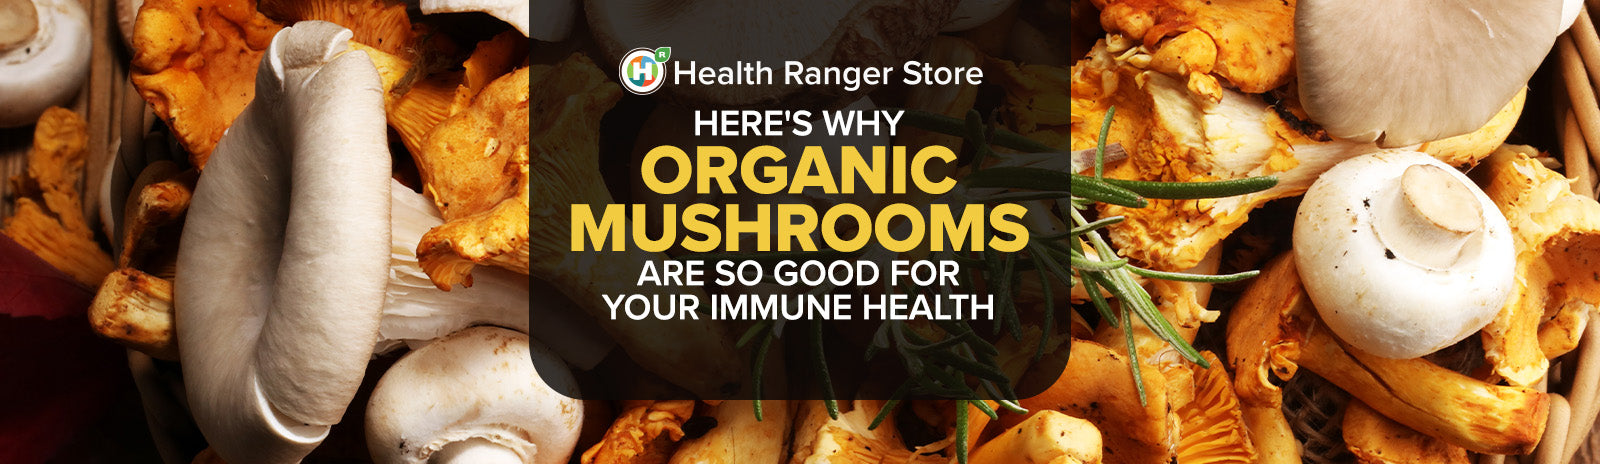 Here’s why Organic Mushrooms are good for your immune health